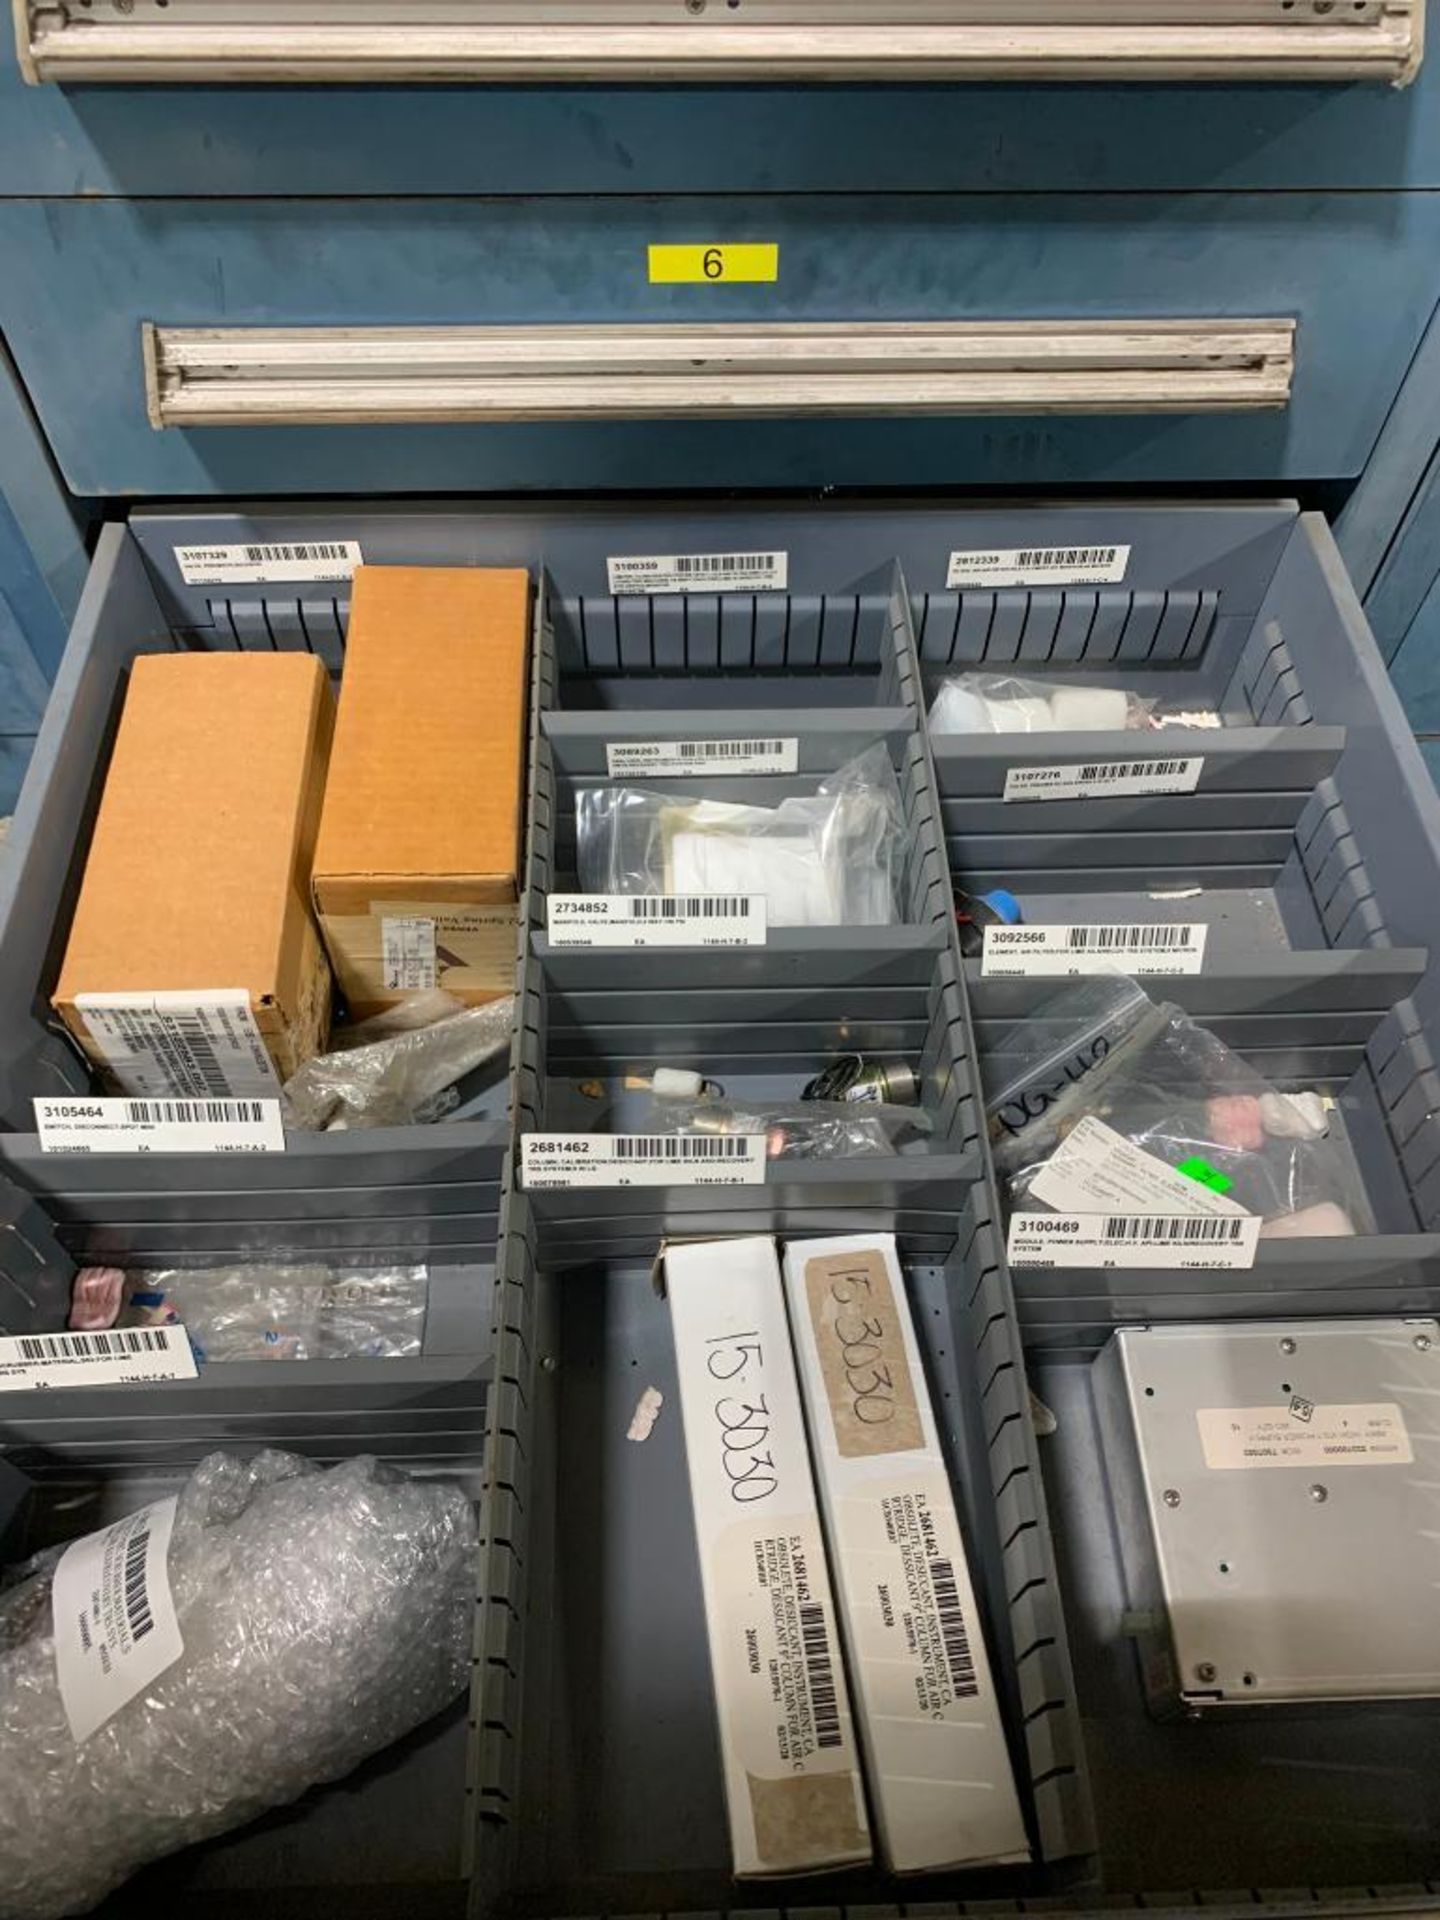 Stanley Vidmar 8-Drawer Cabinet w/ Assorted Switches, Burners, Ignitors, Analyzers, Plungers, Assort - Image 8 of 9